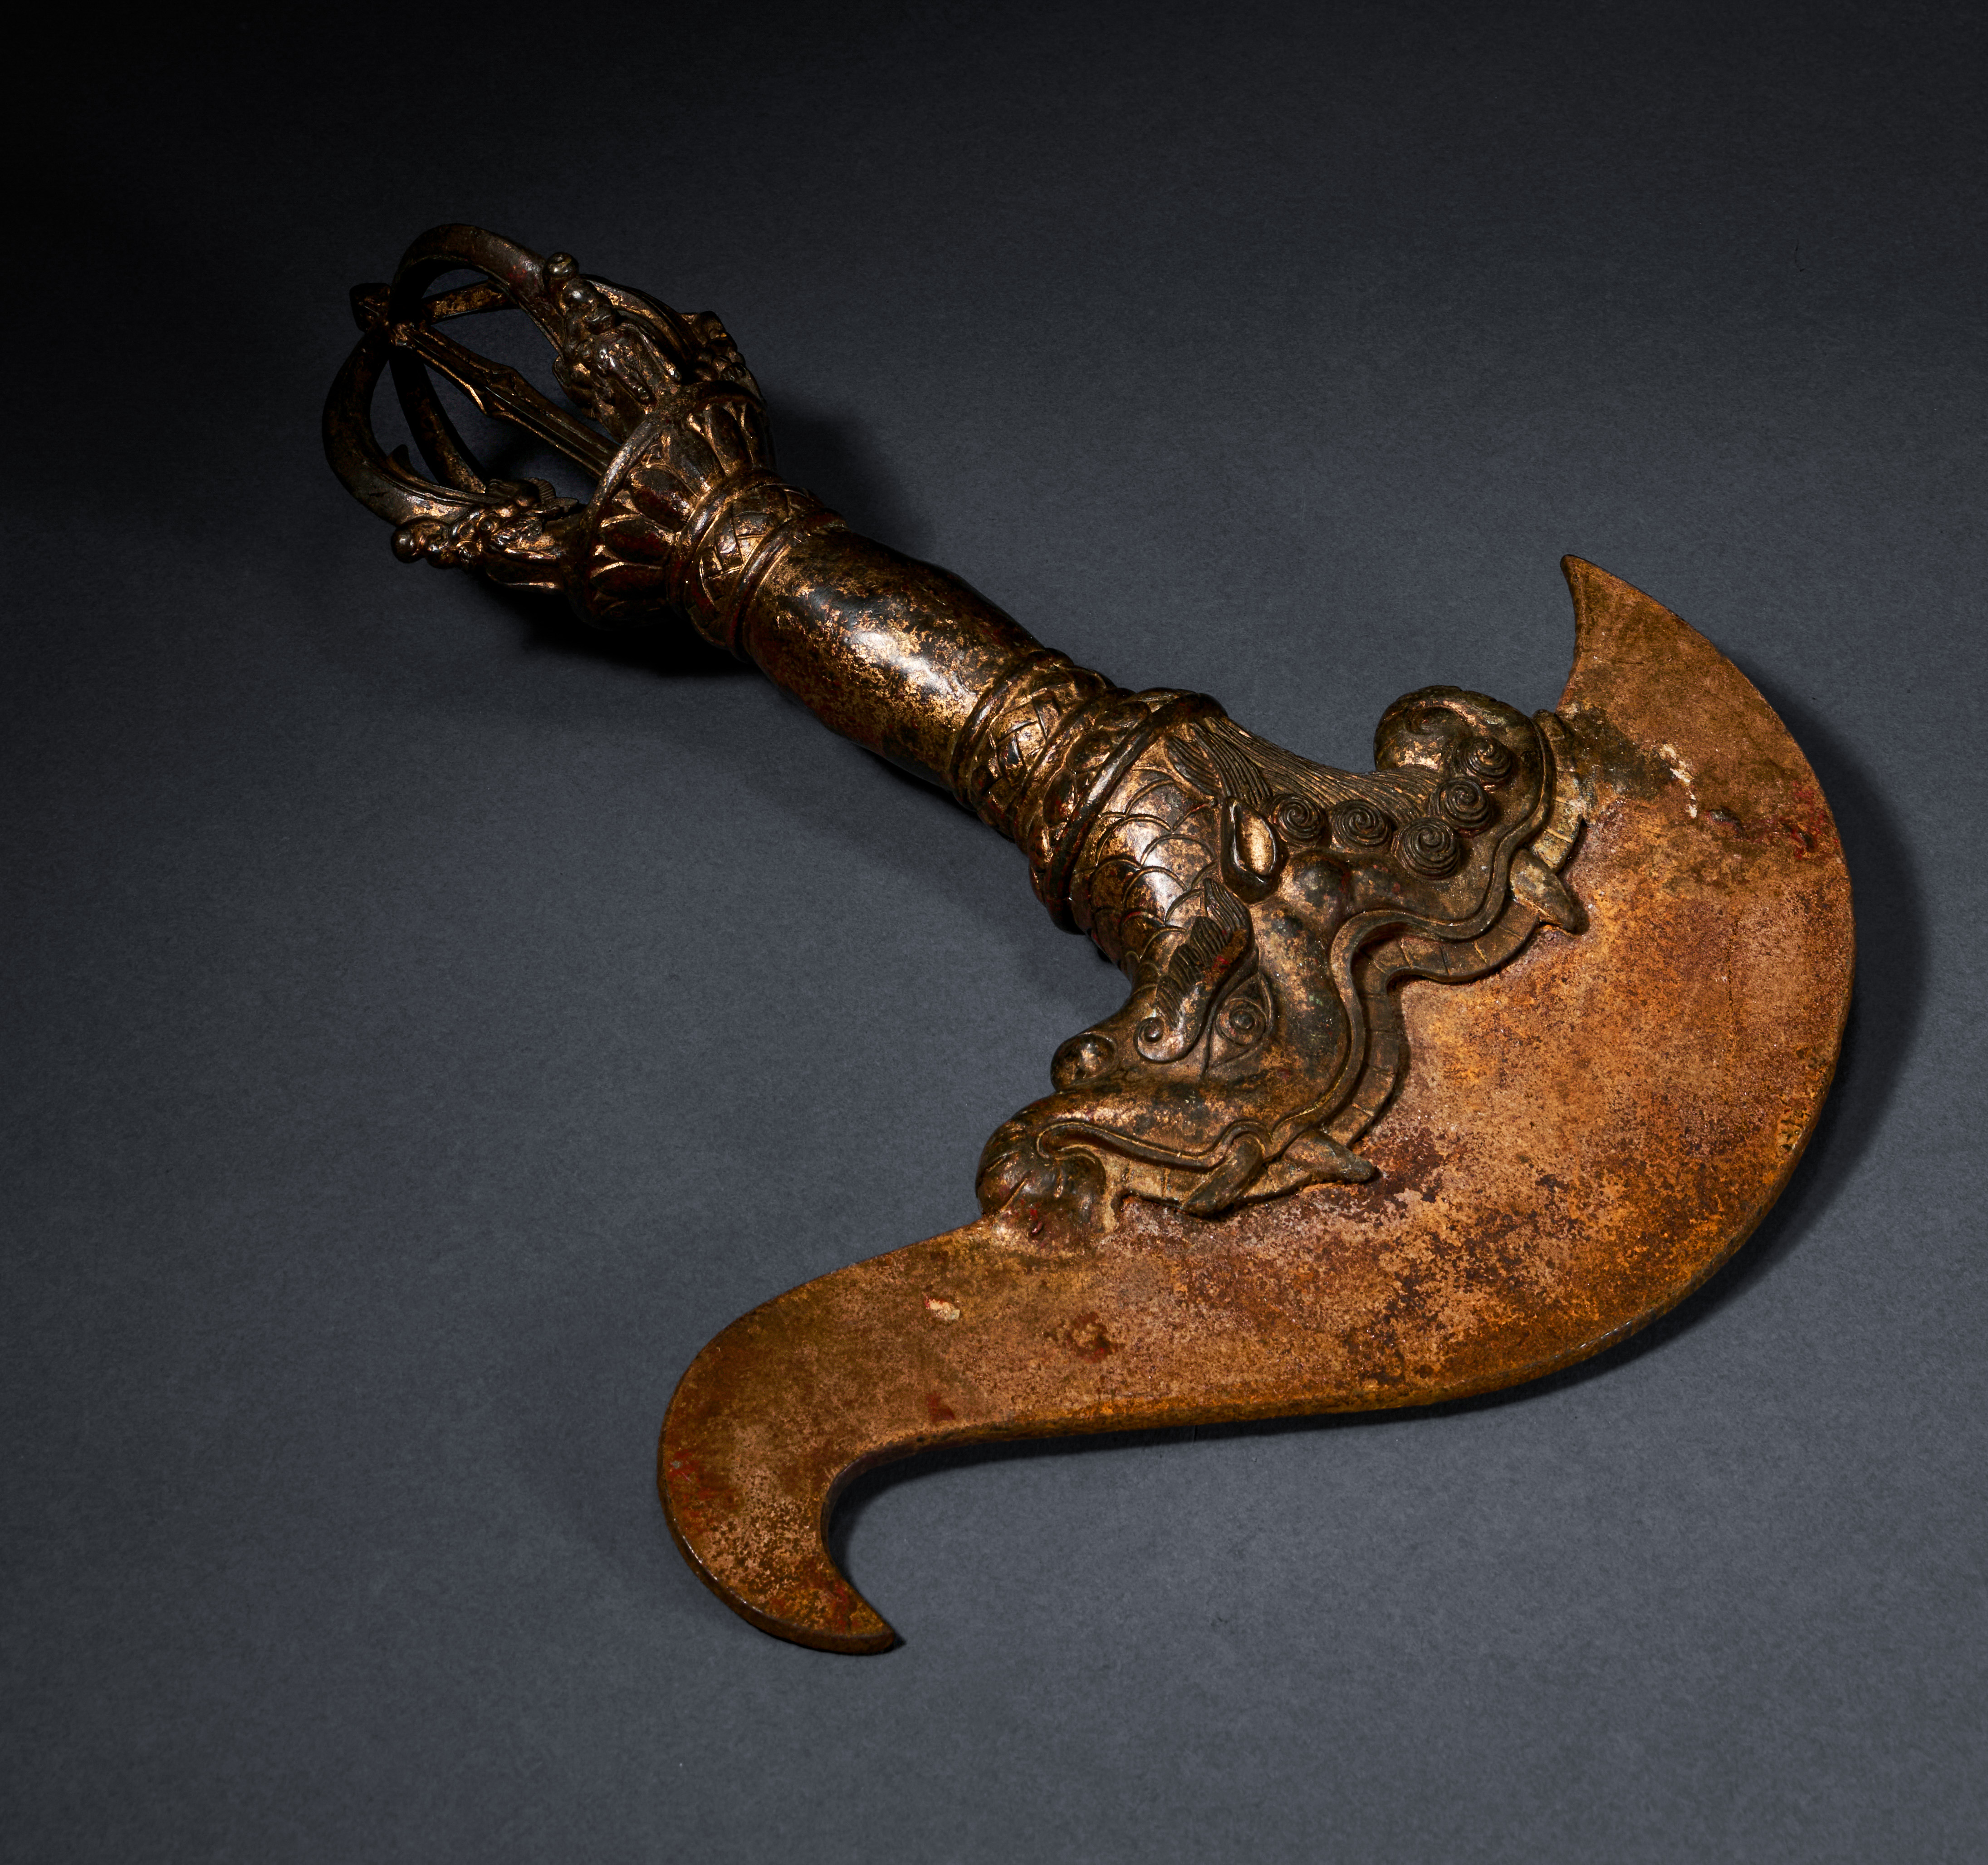 A TIBETAN BRONZE CURVED "FLAYING" KNIFE, 19TH CENTURY - Image 3 of 6